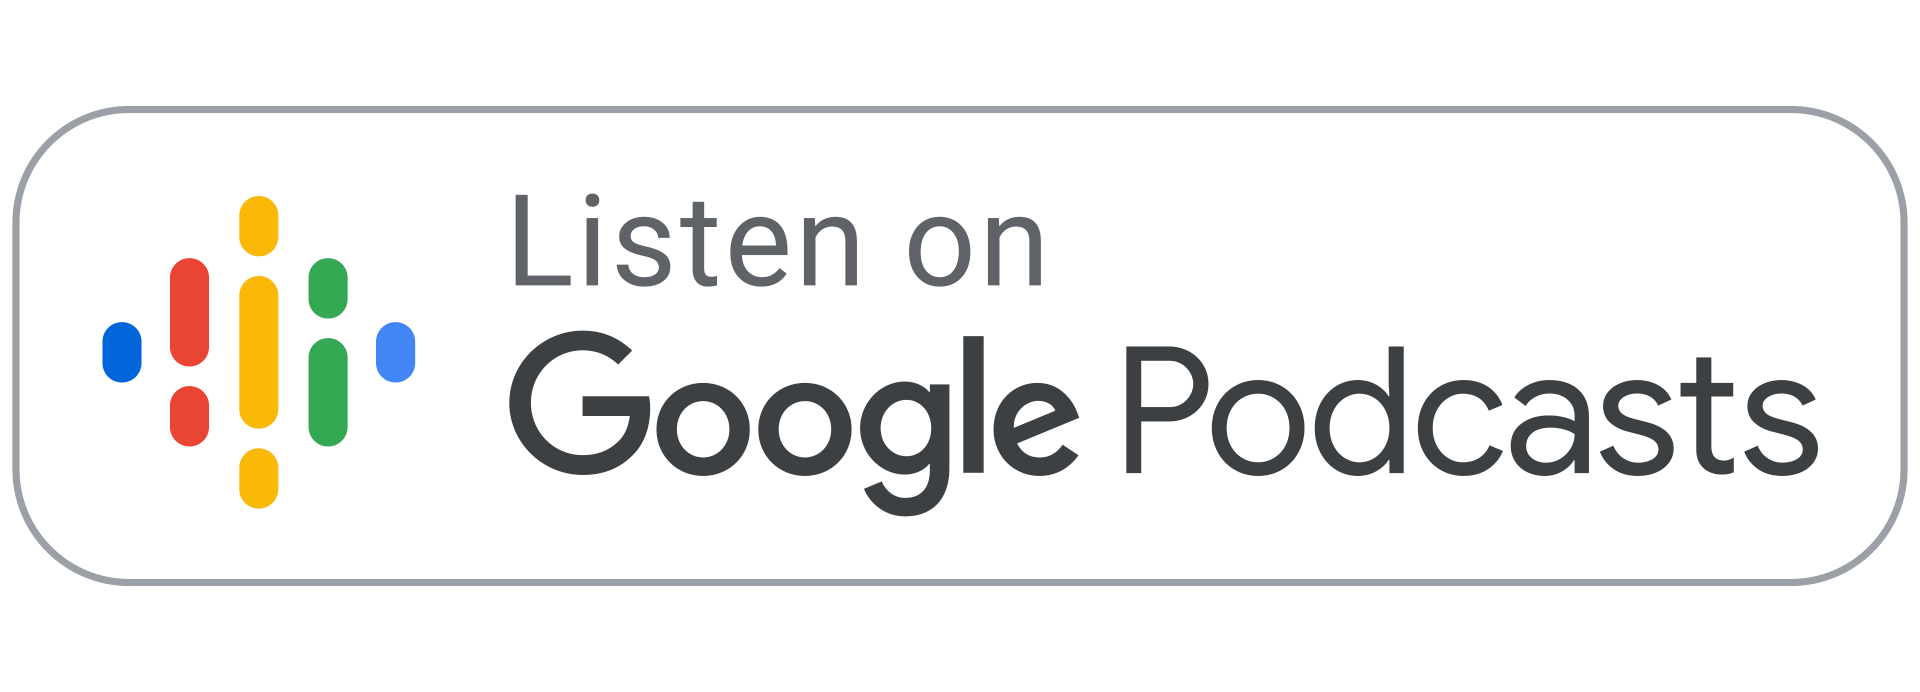 Image of Listen on Google Podcasts button